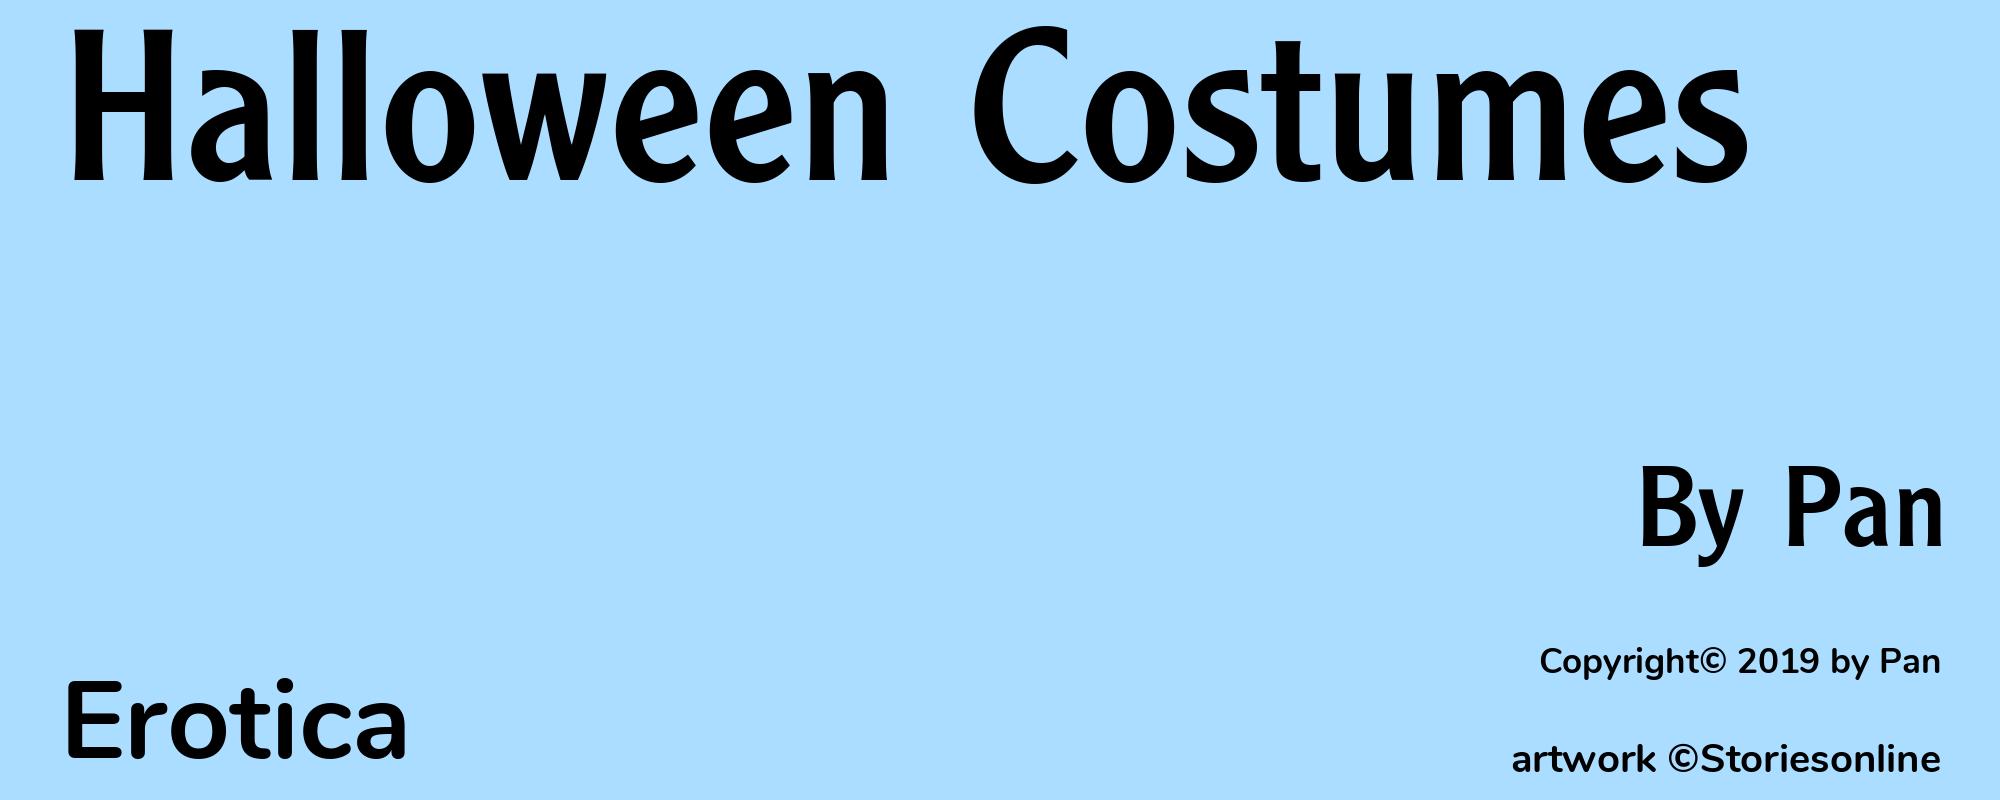 Halloween Costumes - Cover